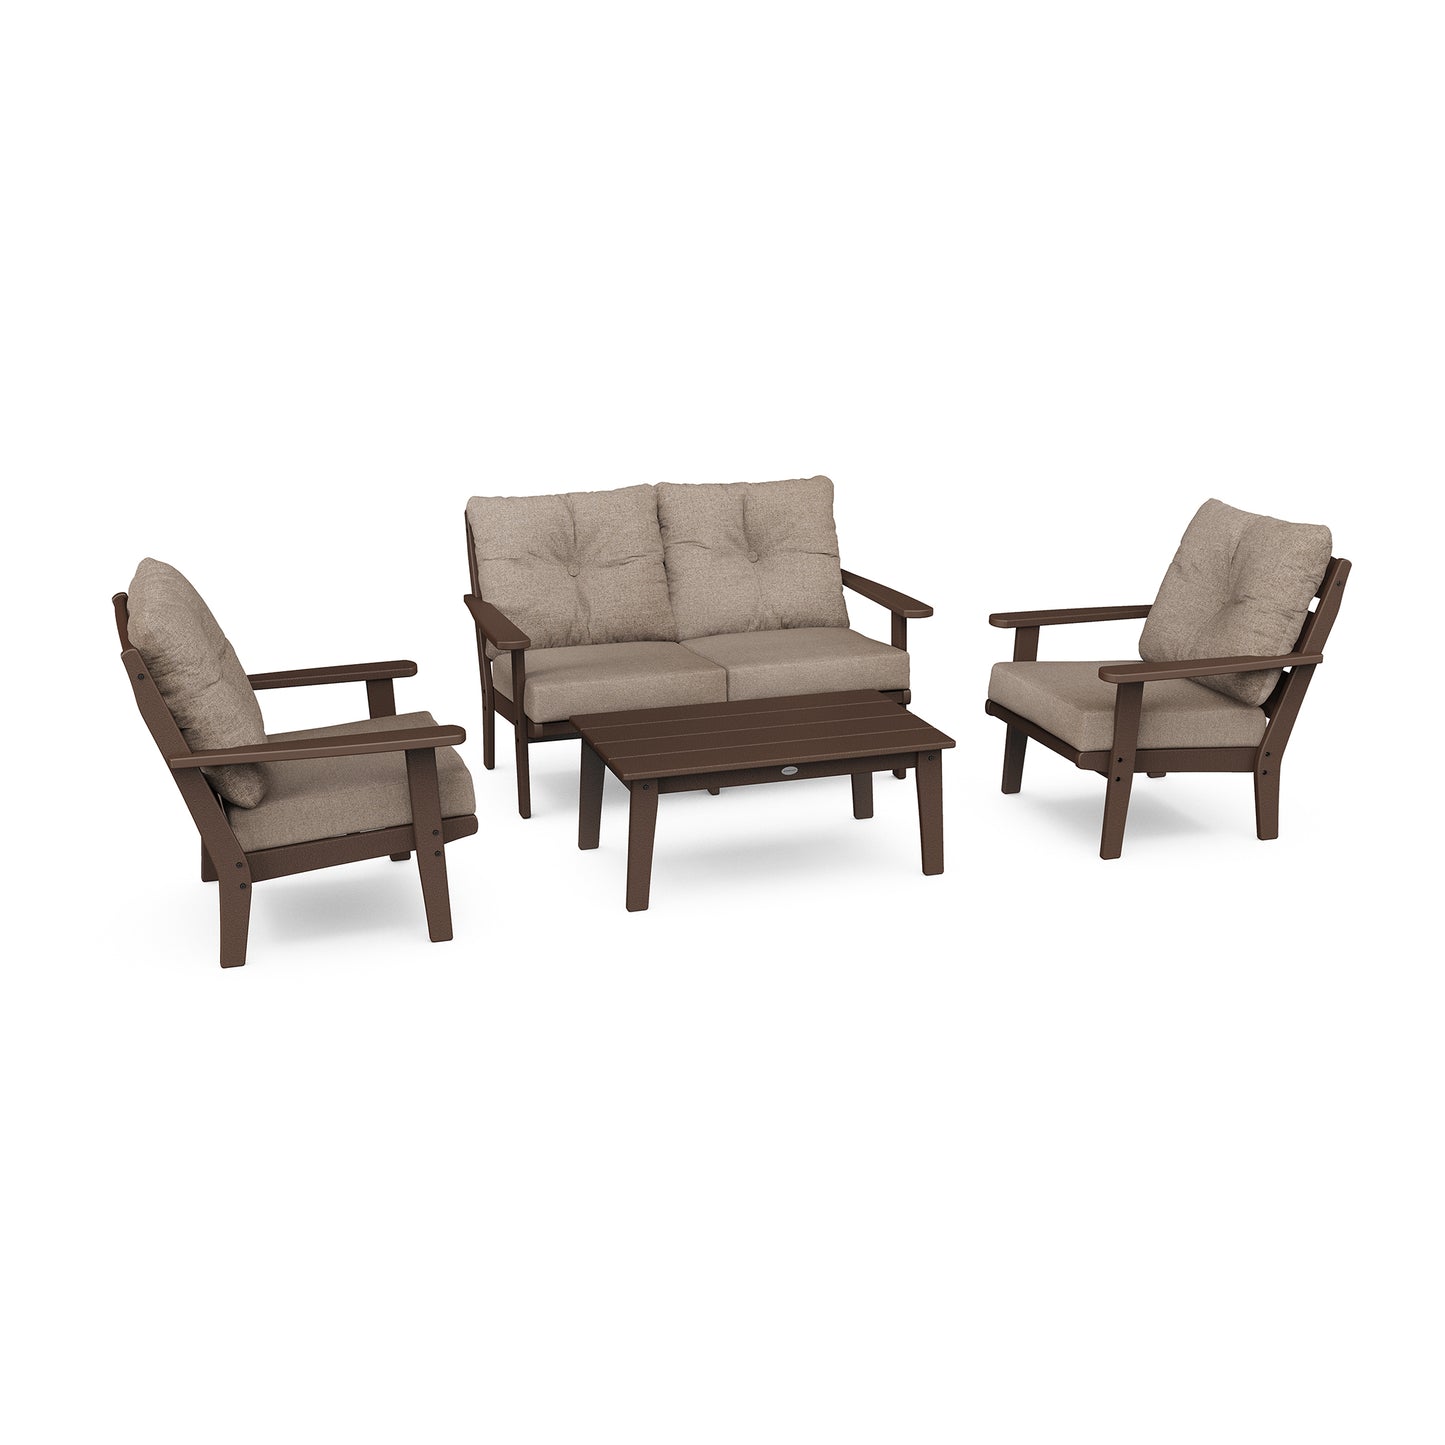 A POLYWOOD Lakeside 4-Piece Deep Seating Set featuring two armchairs, a loveseat, and a coffee table, all made of brown POLYWOOD® lumber with beige cushions.